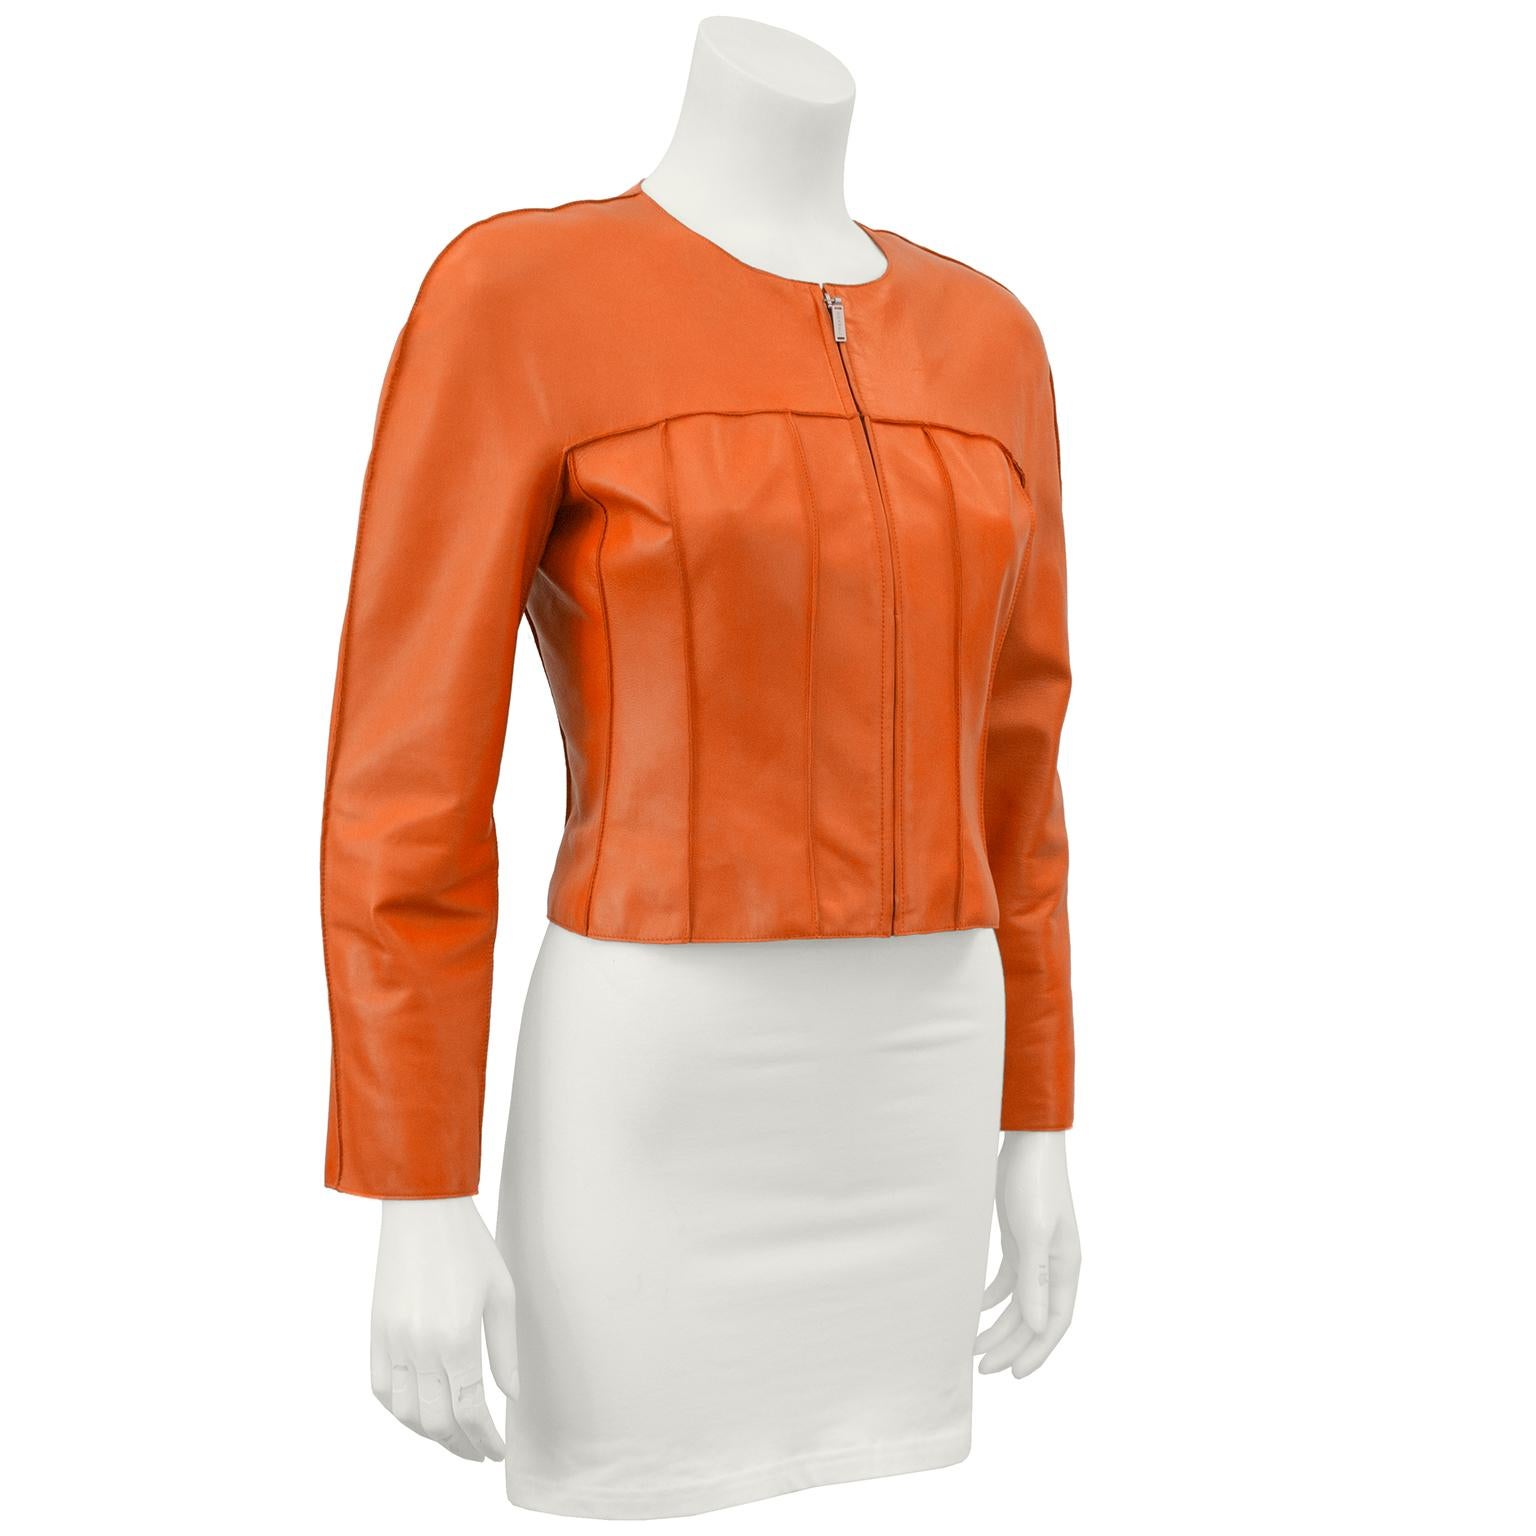 Orange lambskin cropped leather jacket from Chanel Spring 1999 collection. The jacket has a slightly structured shoulder, zipper up the front, rounded neckline and vertical seam detail throughout the body. Fully lined in branded orange silk, CHANEL